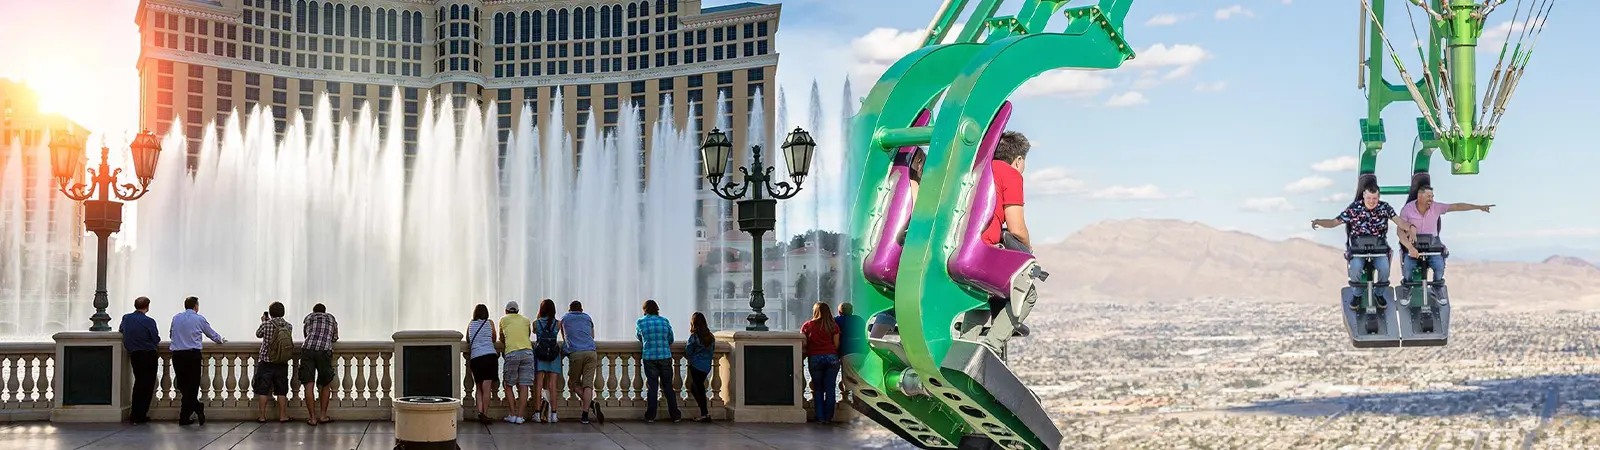 11 Family Things to Do in Las Vegas Off the Strip